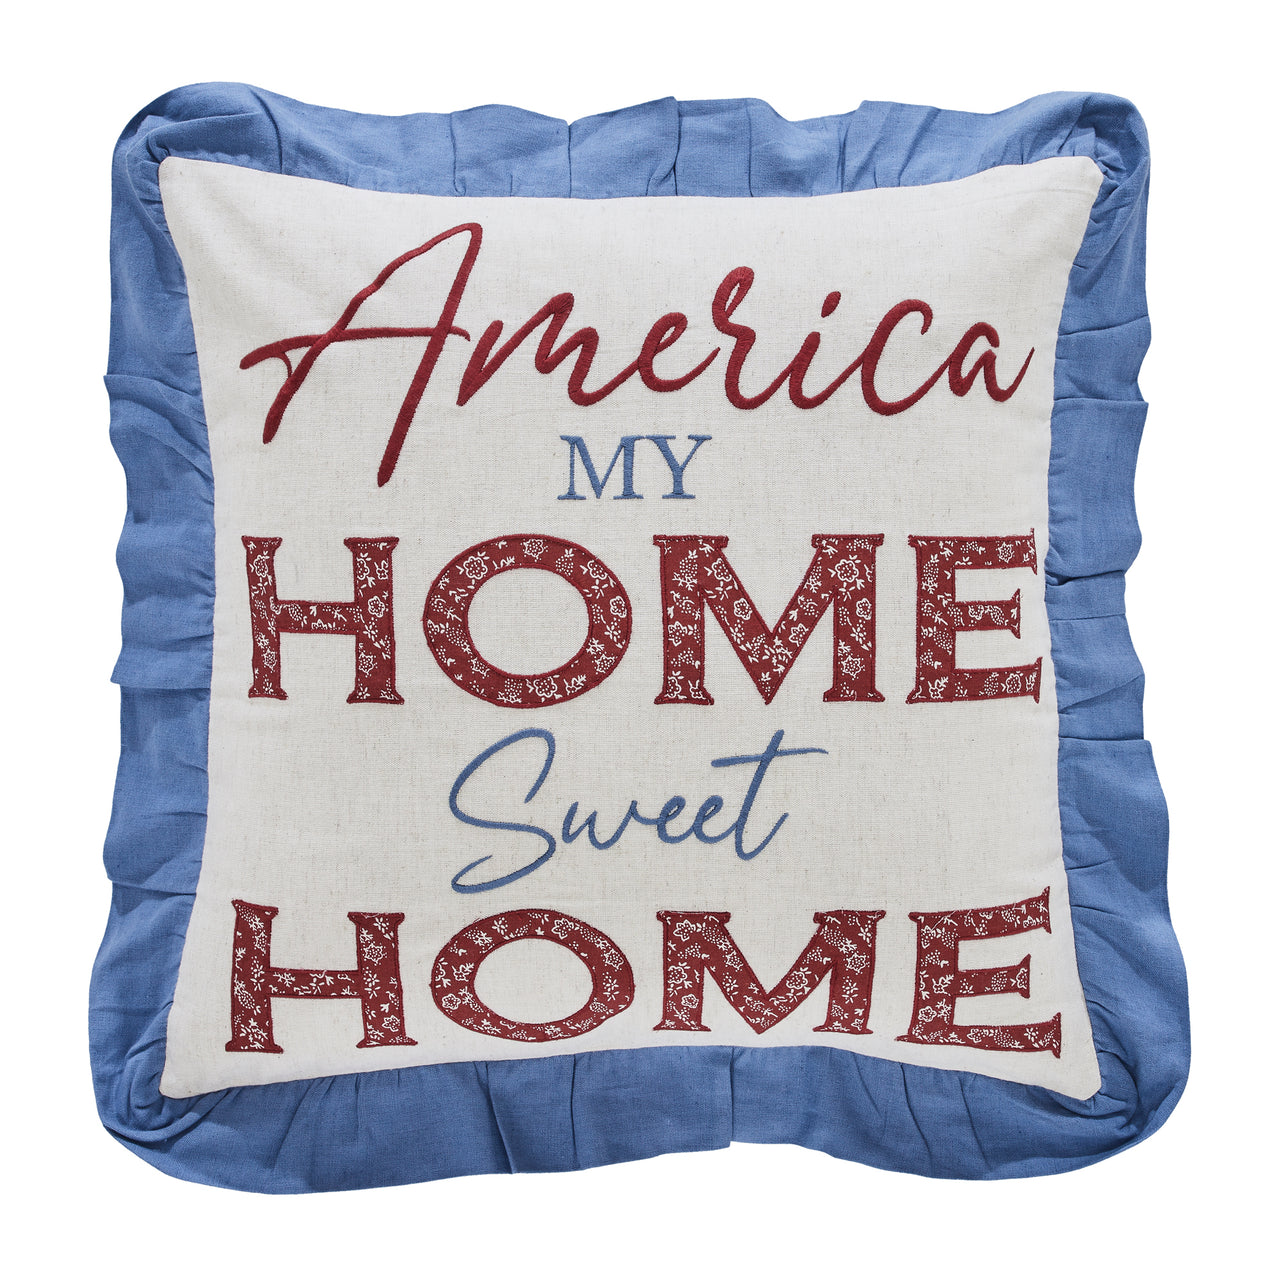 Celebration Home Sweet Home Pillow 18x18 VHC Brands